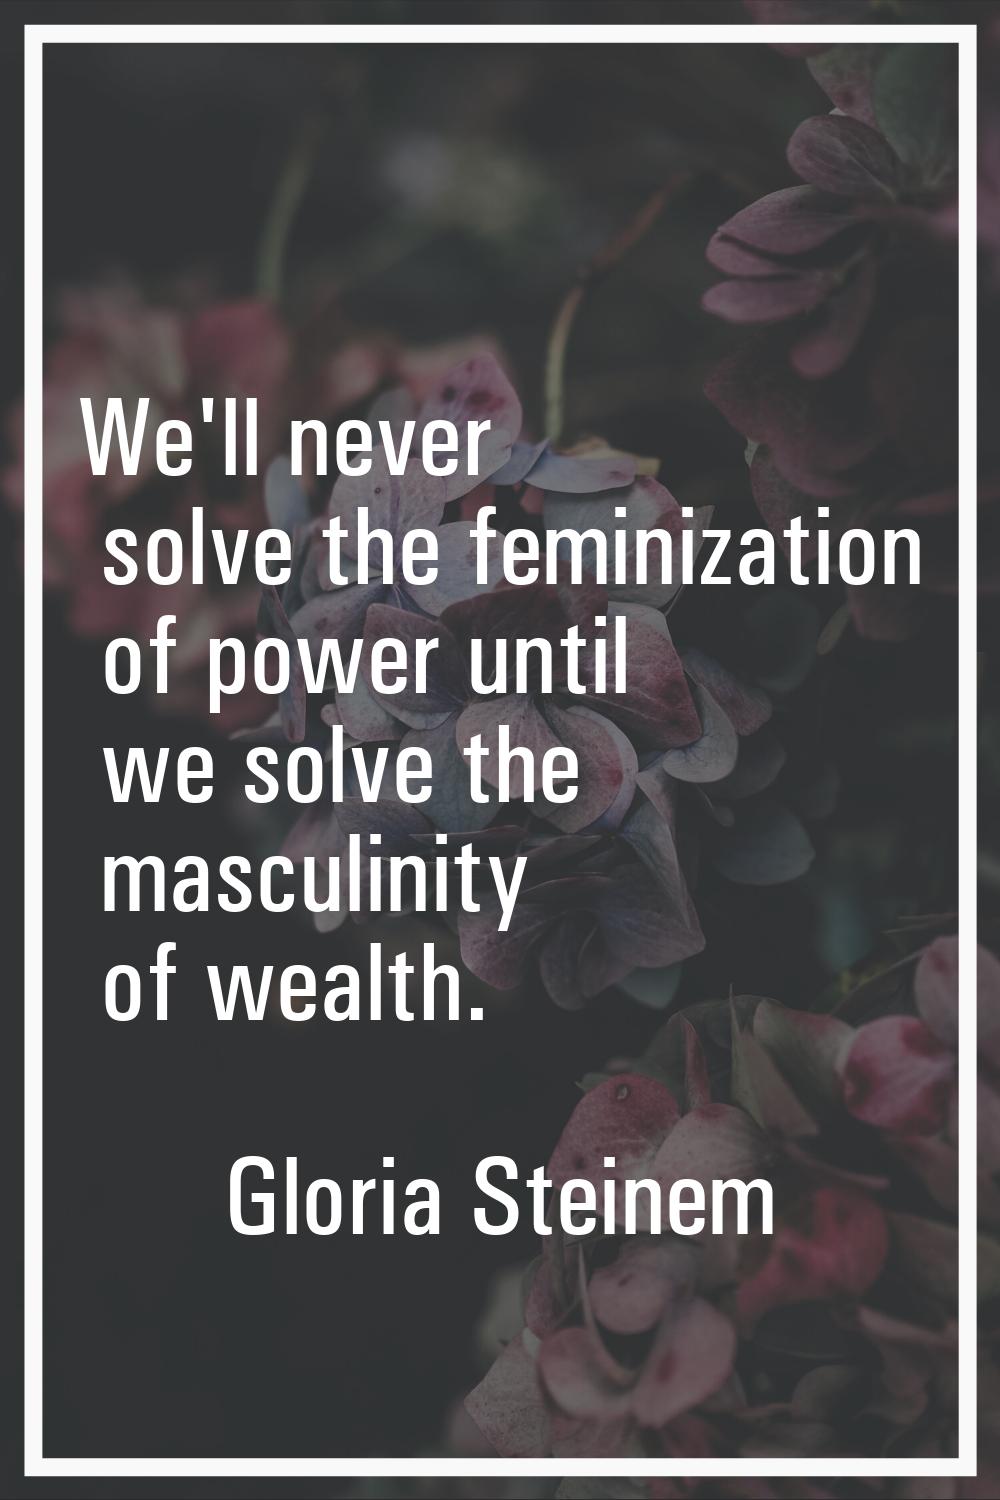 We'll never solve the feminization of power until we solve the masculinity of wealth.